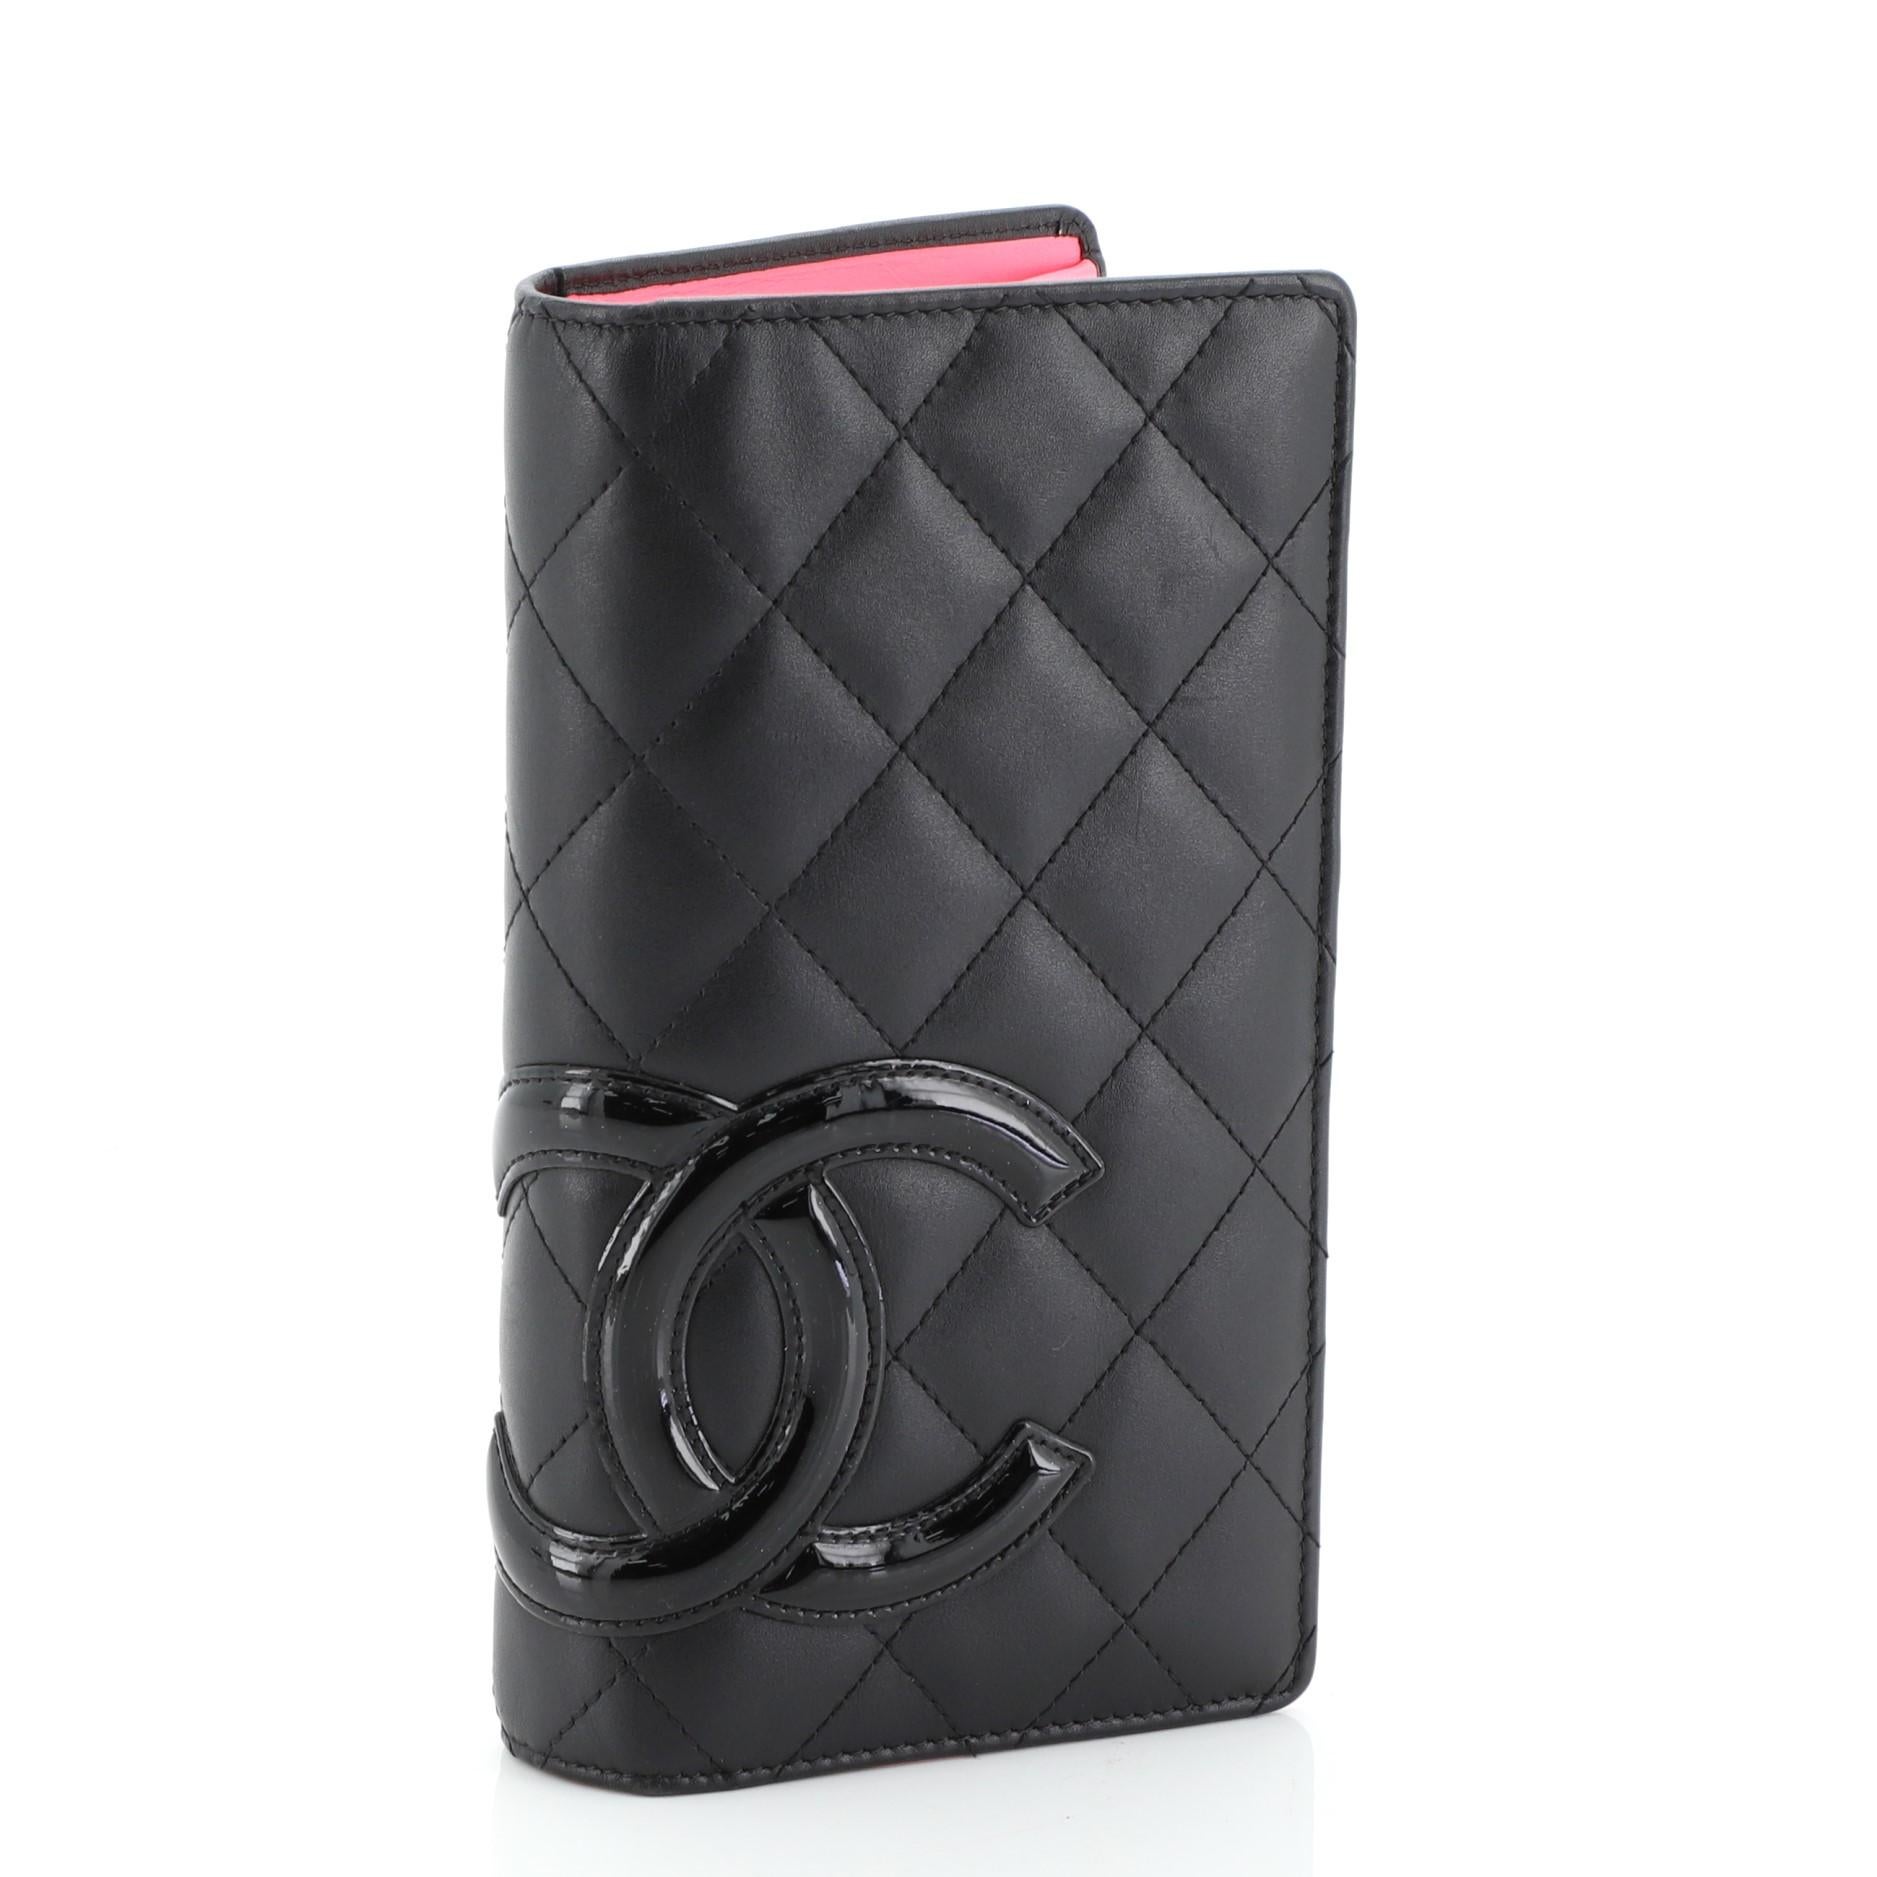 This Chanel Cambon Wallet Quilted Lambskin Long, crafted from black quilted lambskin leather, features patent CC logo and silver-tone hardware. It opens to a pink leather interior with multiple card slots, long flat pockets, and zip pocket. Hologram